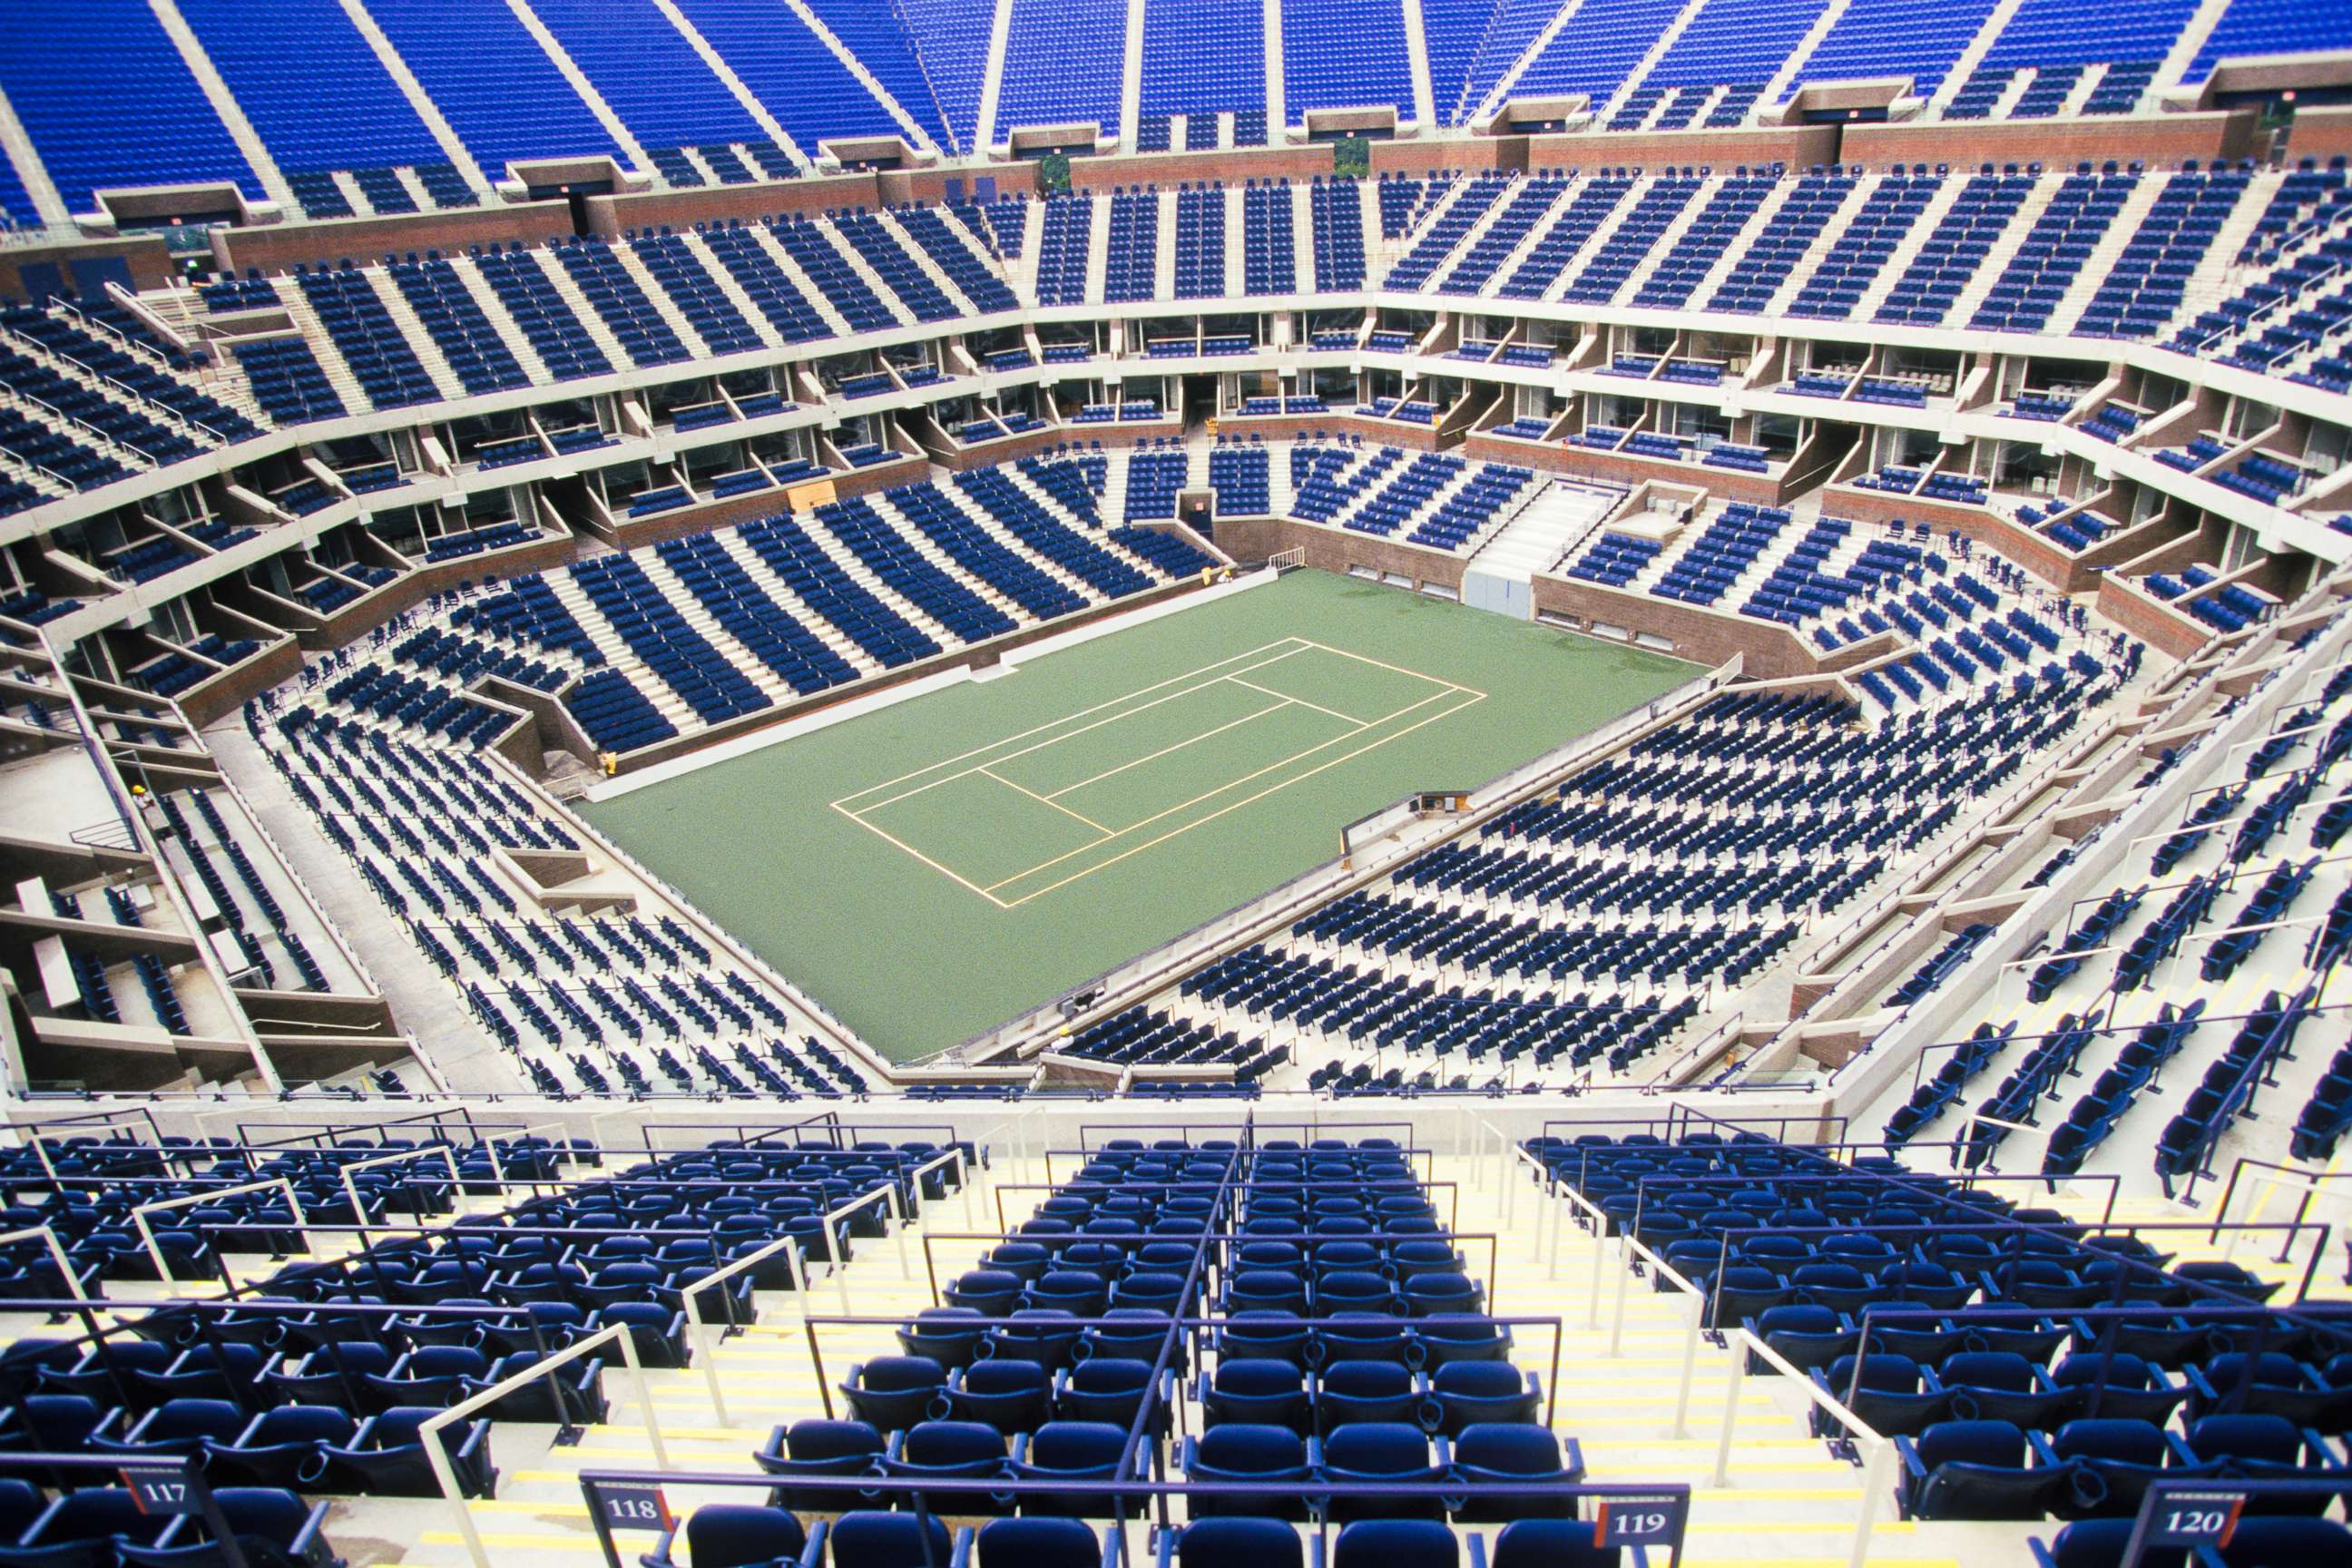 Arthur Ashe Stadium, home to the U.S. Open, located at the USTA Billie Jean King National Tennis Center in Flushing, Queens.